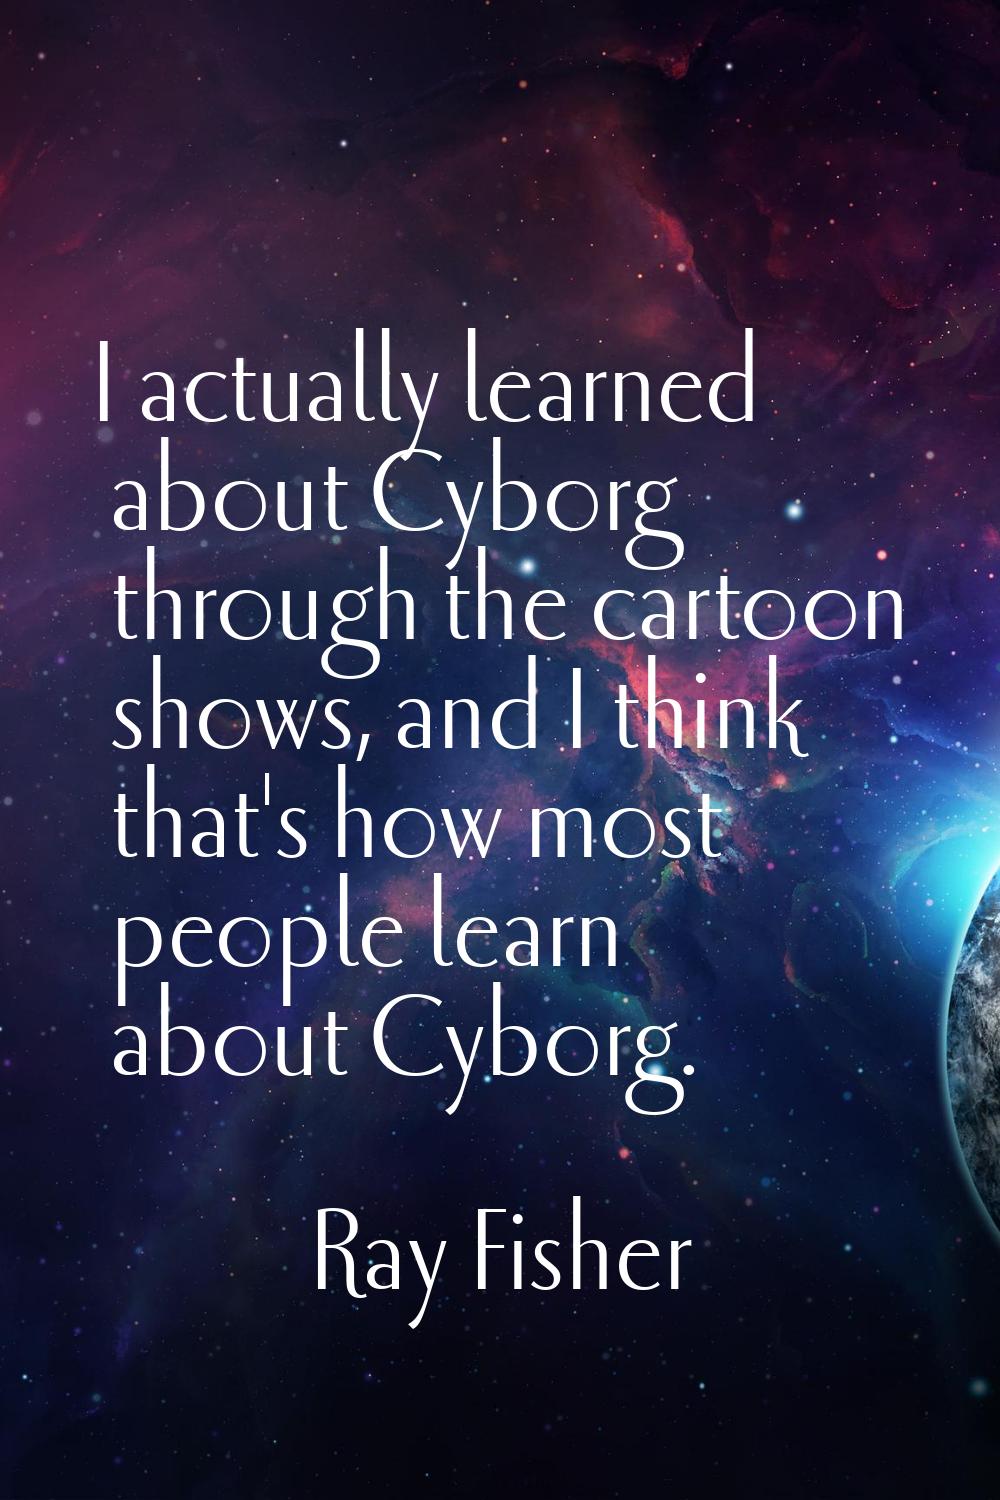 I actually learned about Cyborg through the cartoon shows, and I think that's how most people learn